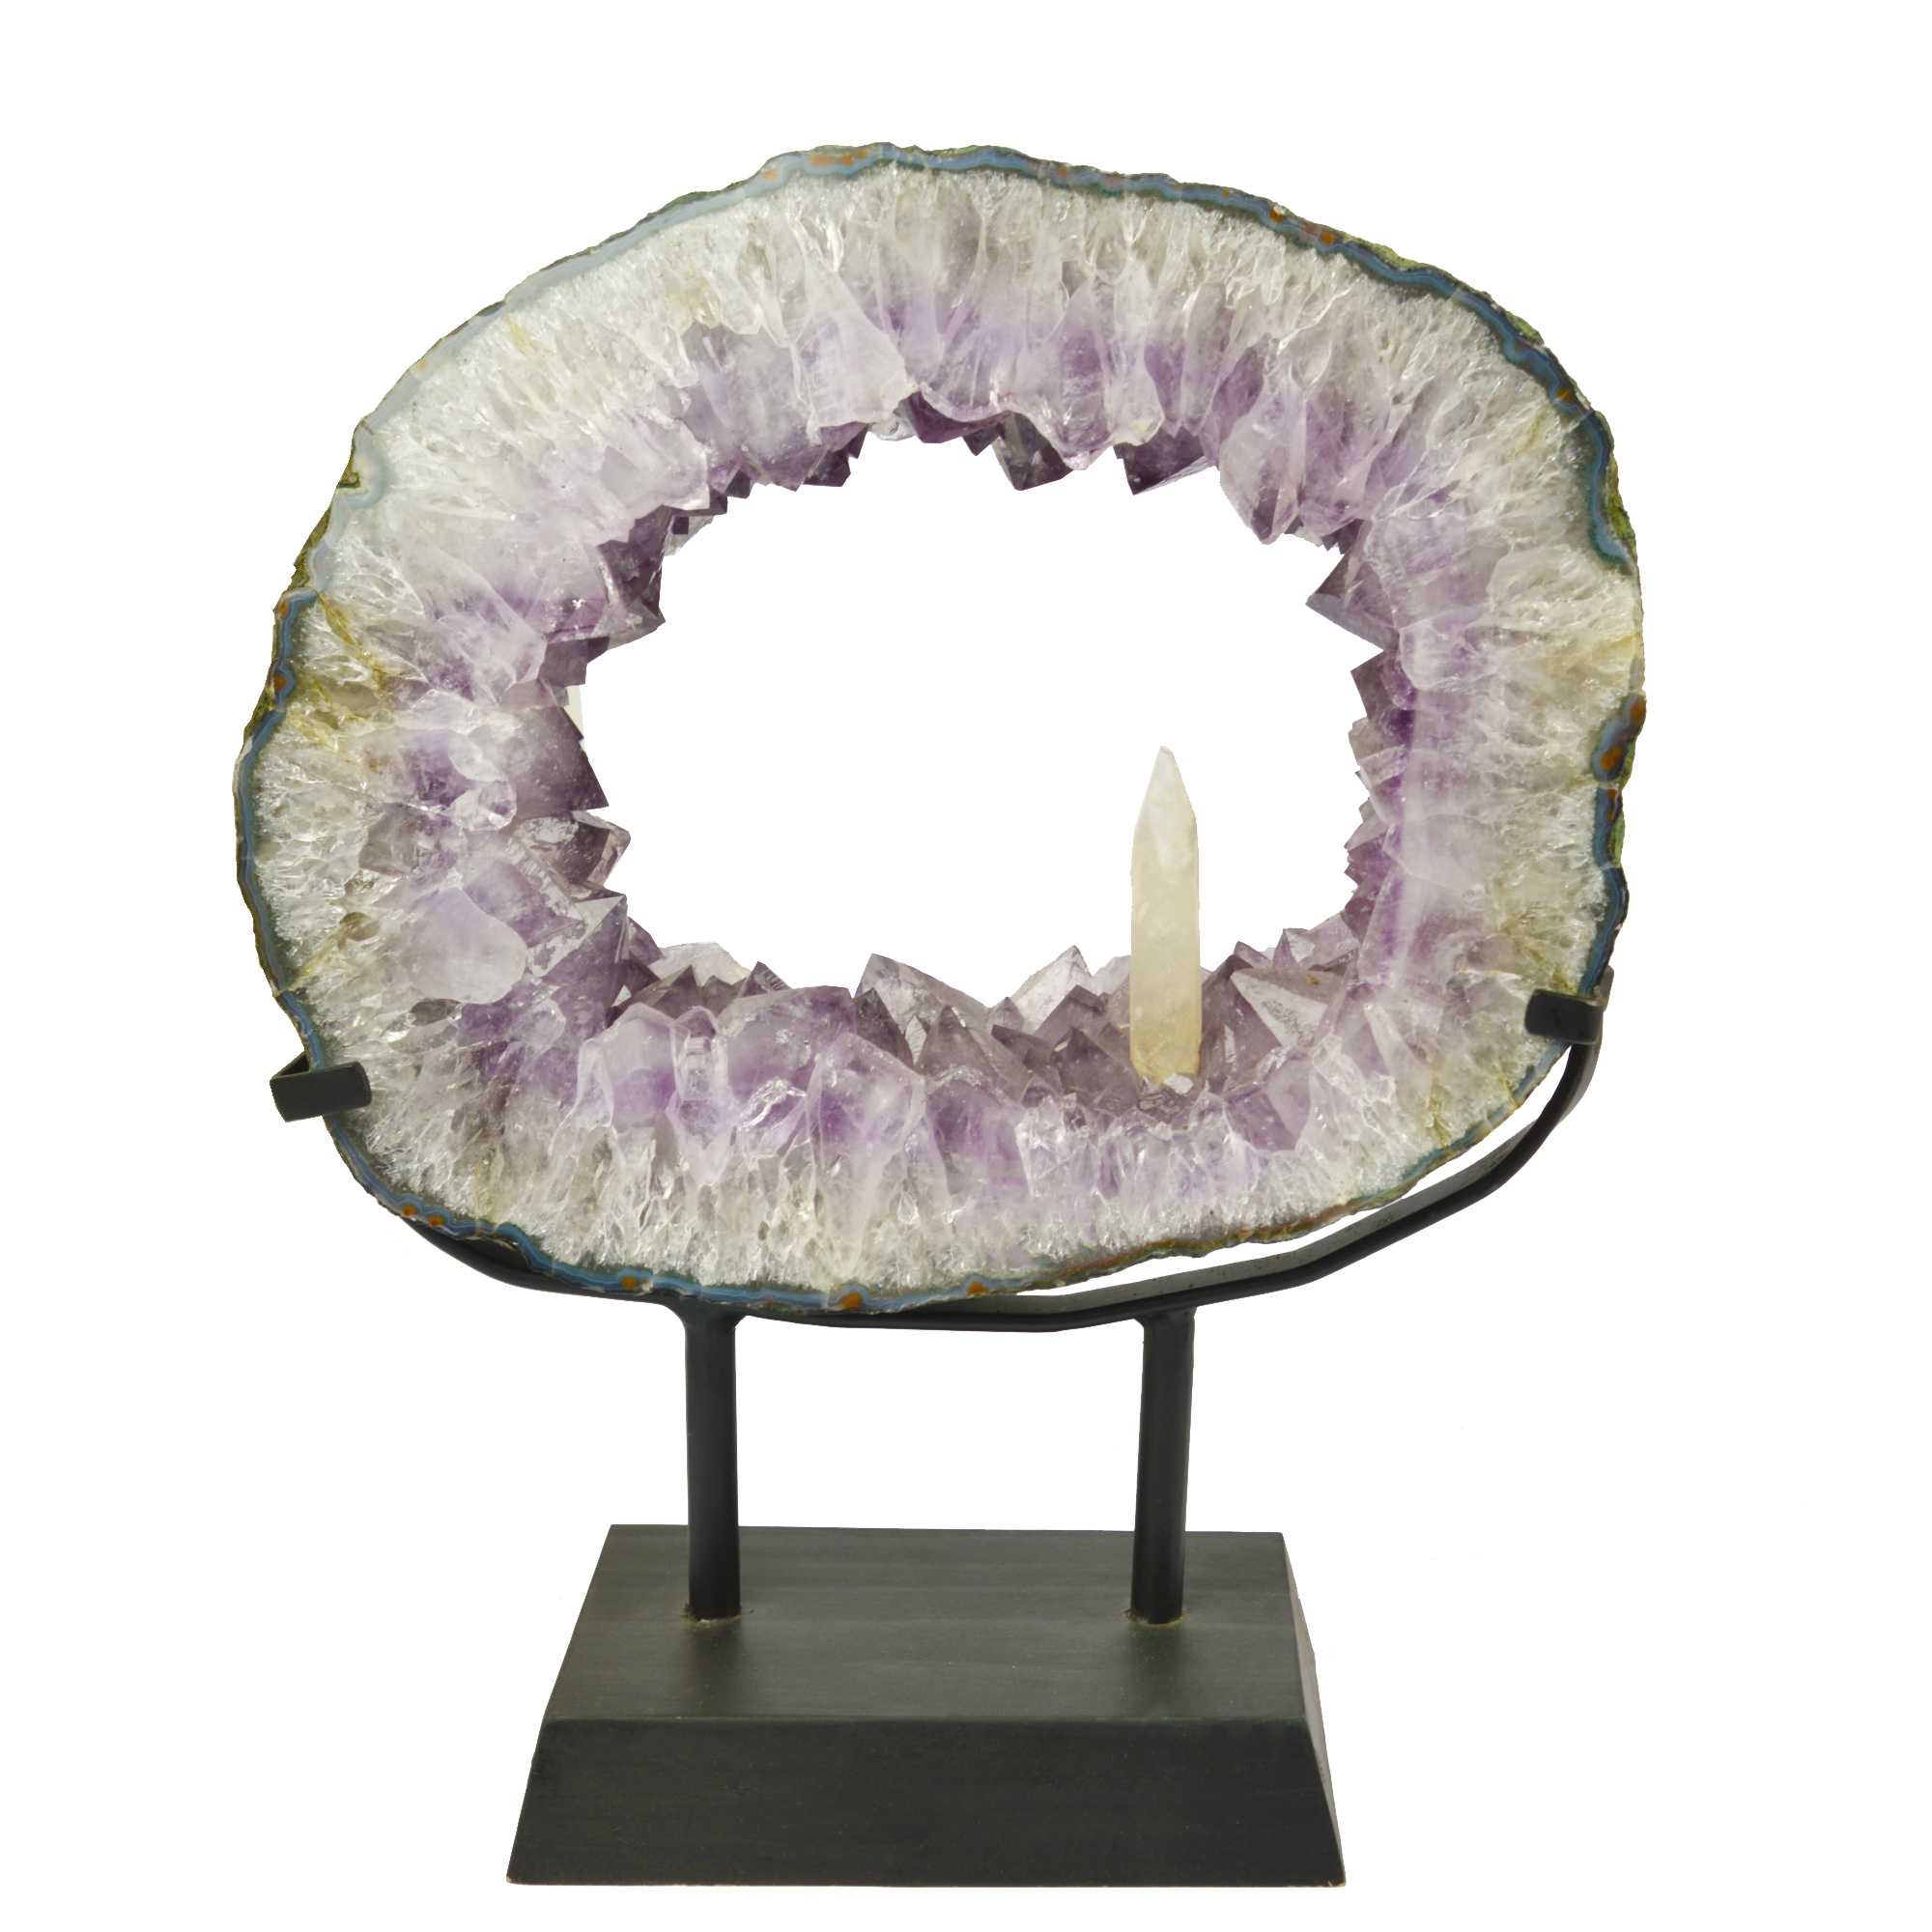 Amethyst druze with calcite